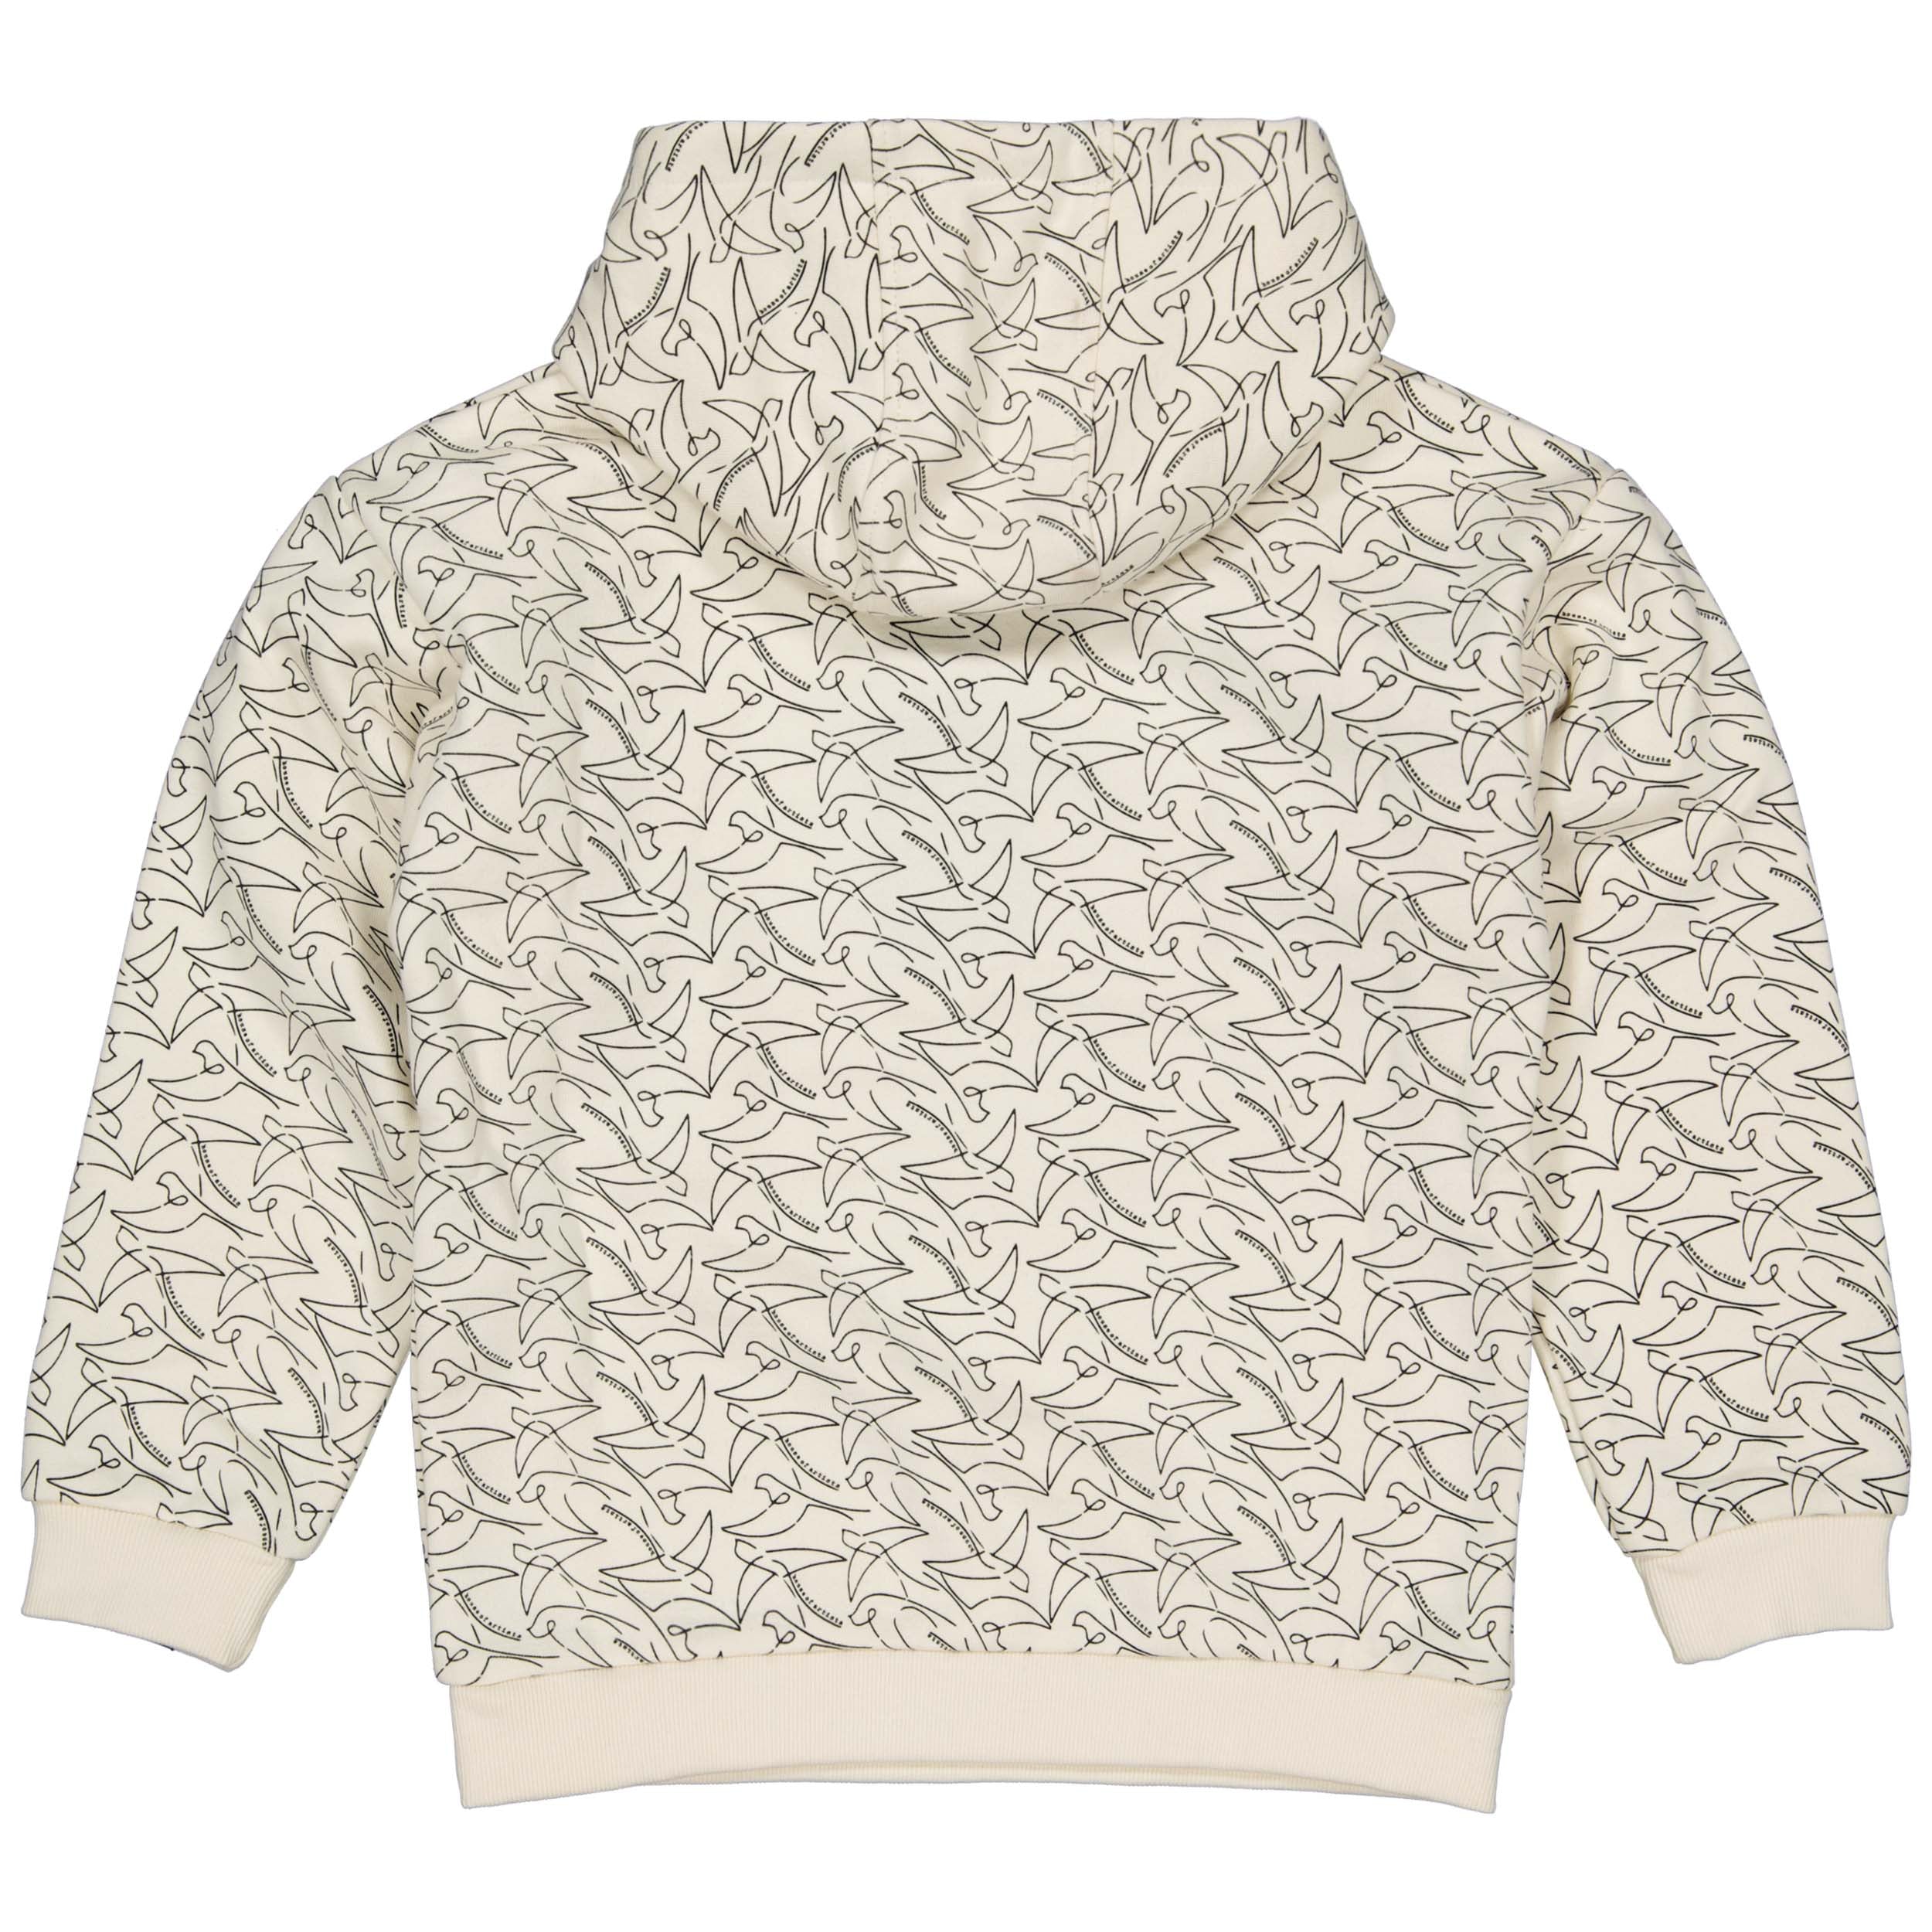 Unisexs Hooded Sweater Off White van House of Artists in de kleur Off White in maat 170-176.